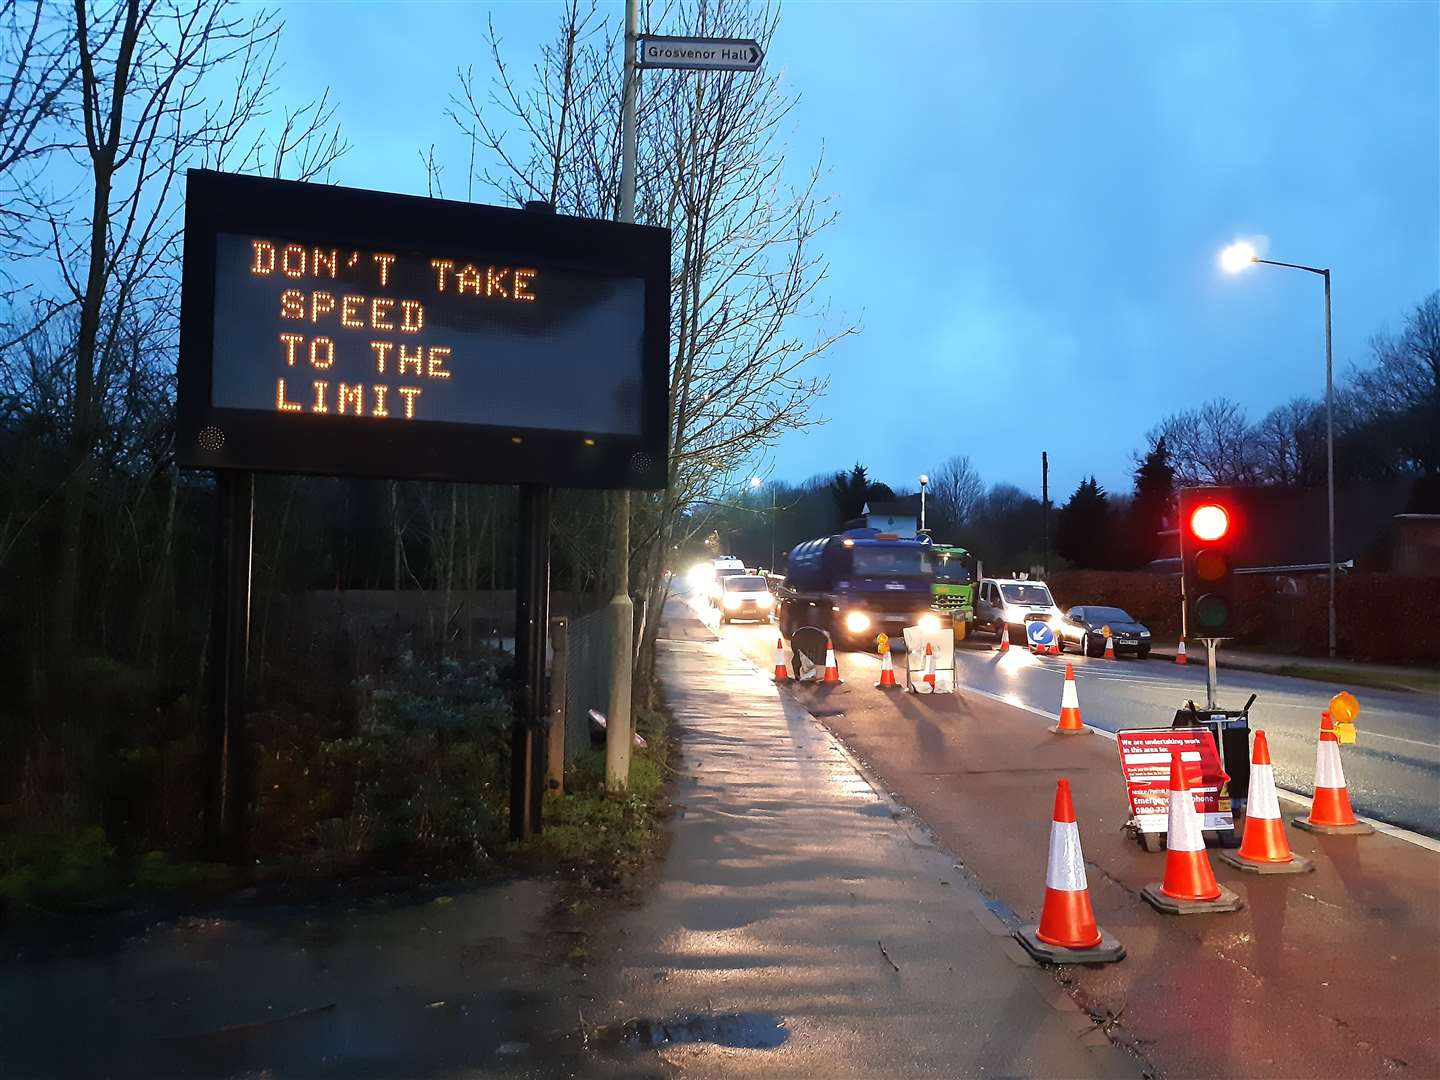 The temporary lights were installed next to a 'don't take speed to the limit' sign